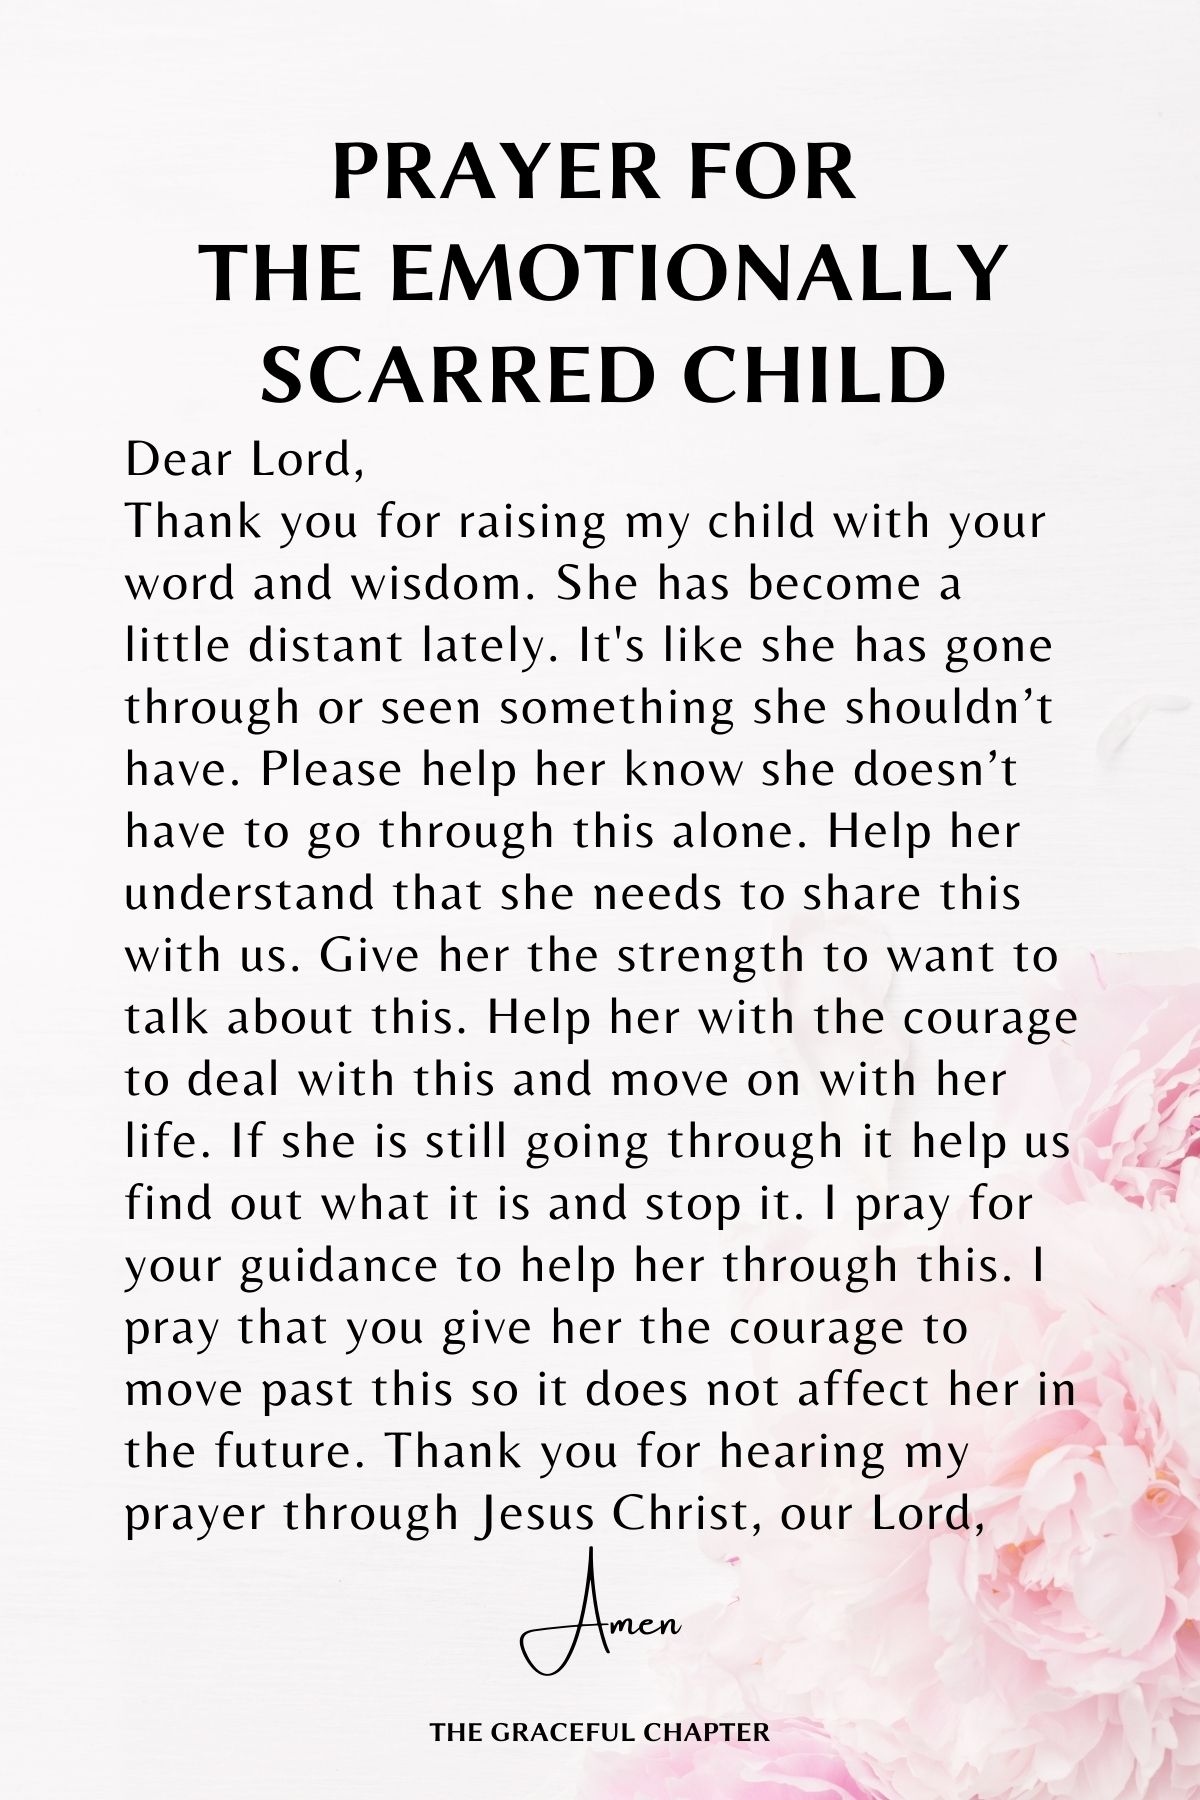 Prayer for the emotionally scarred child